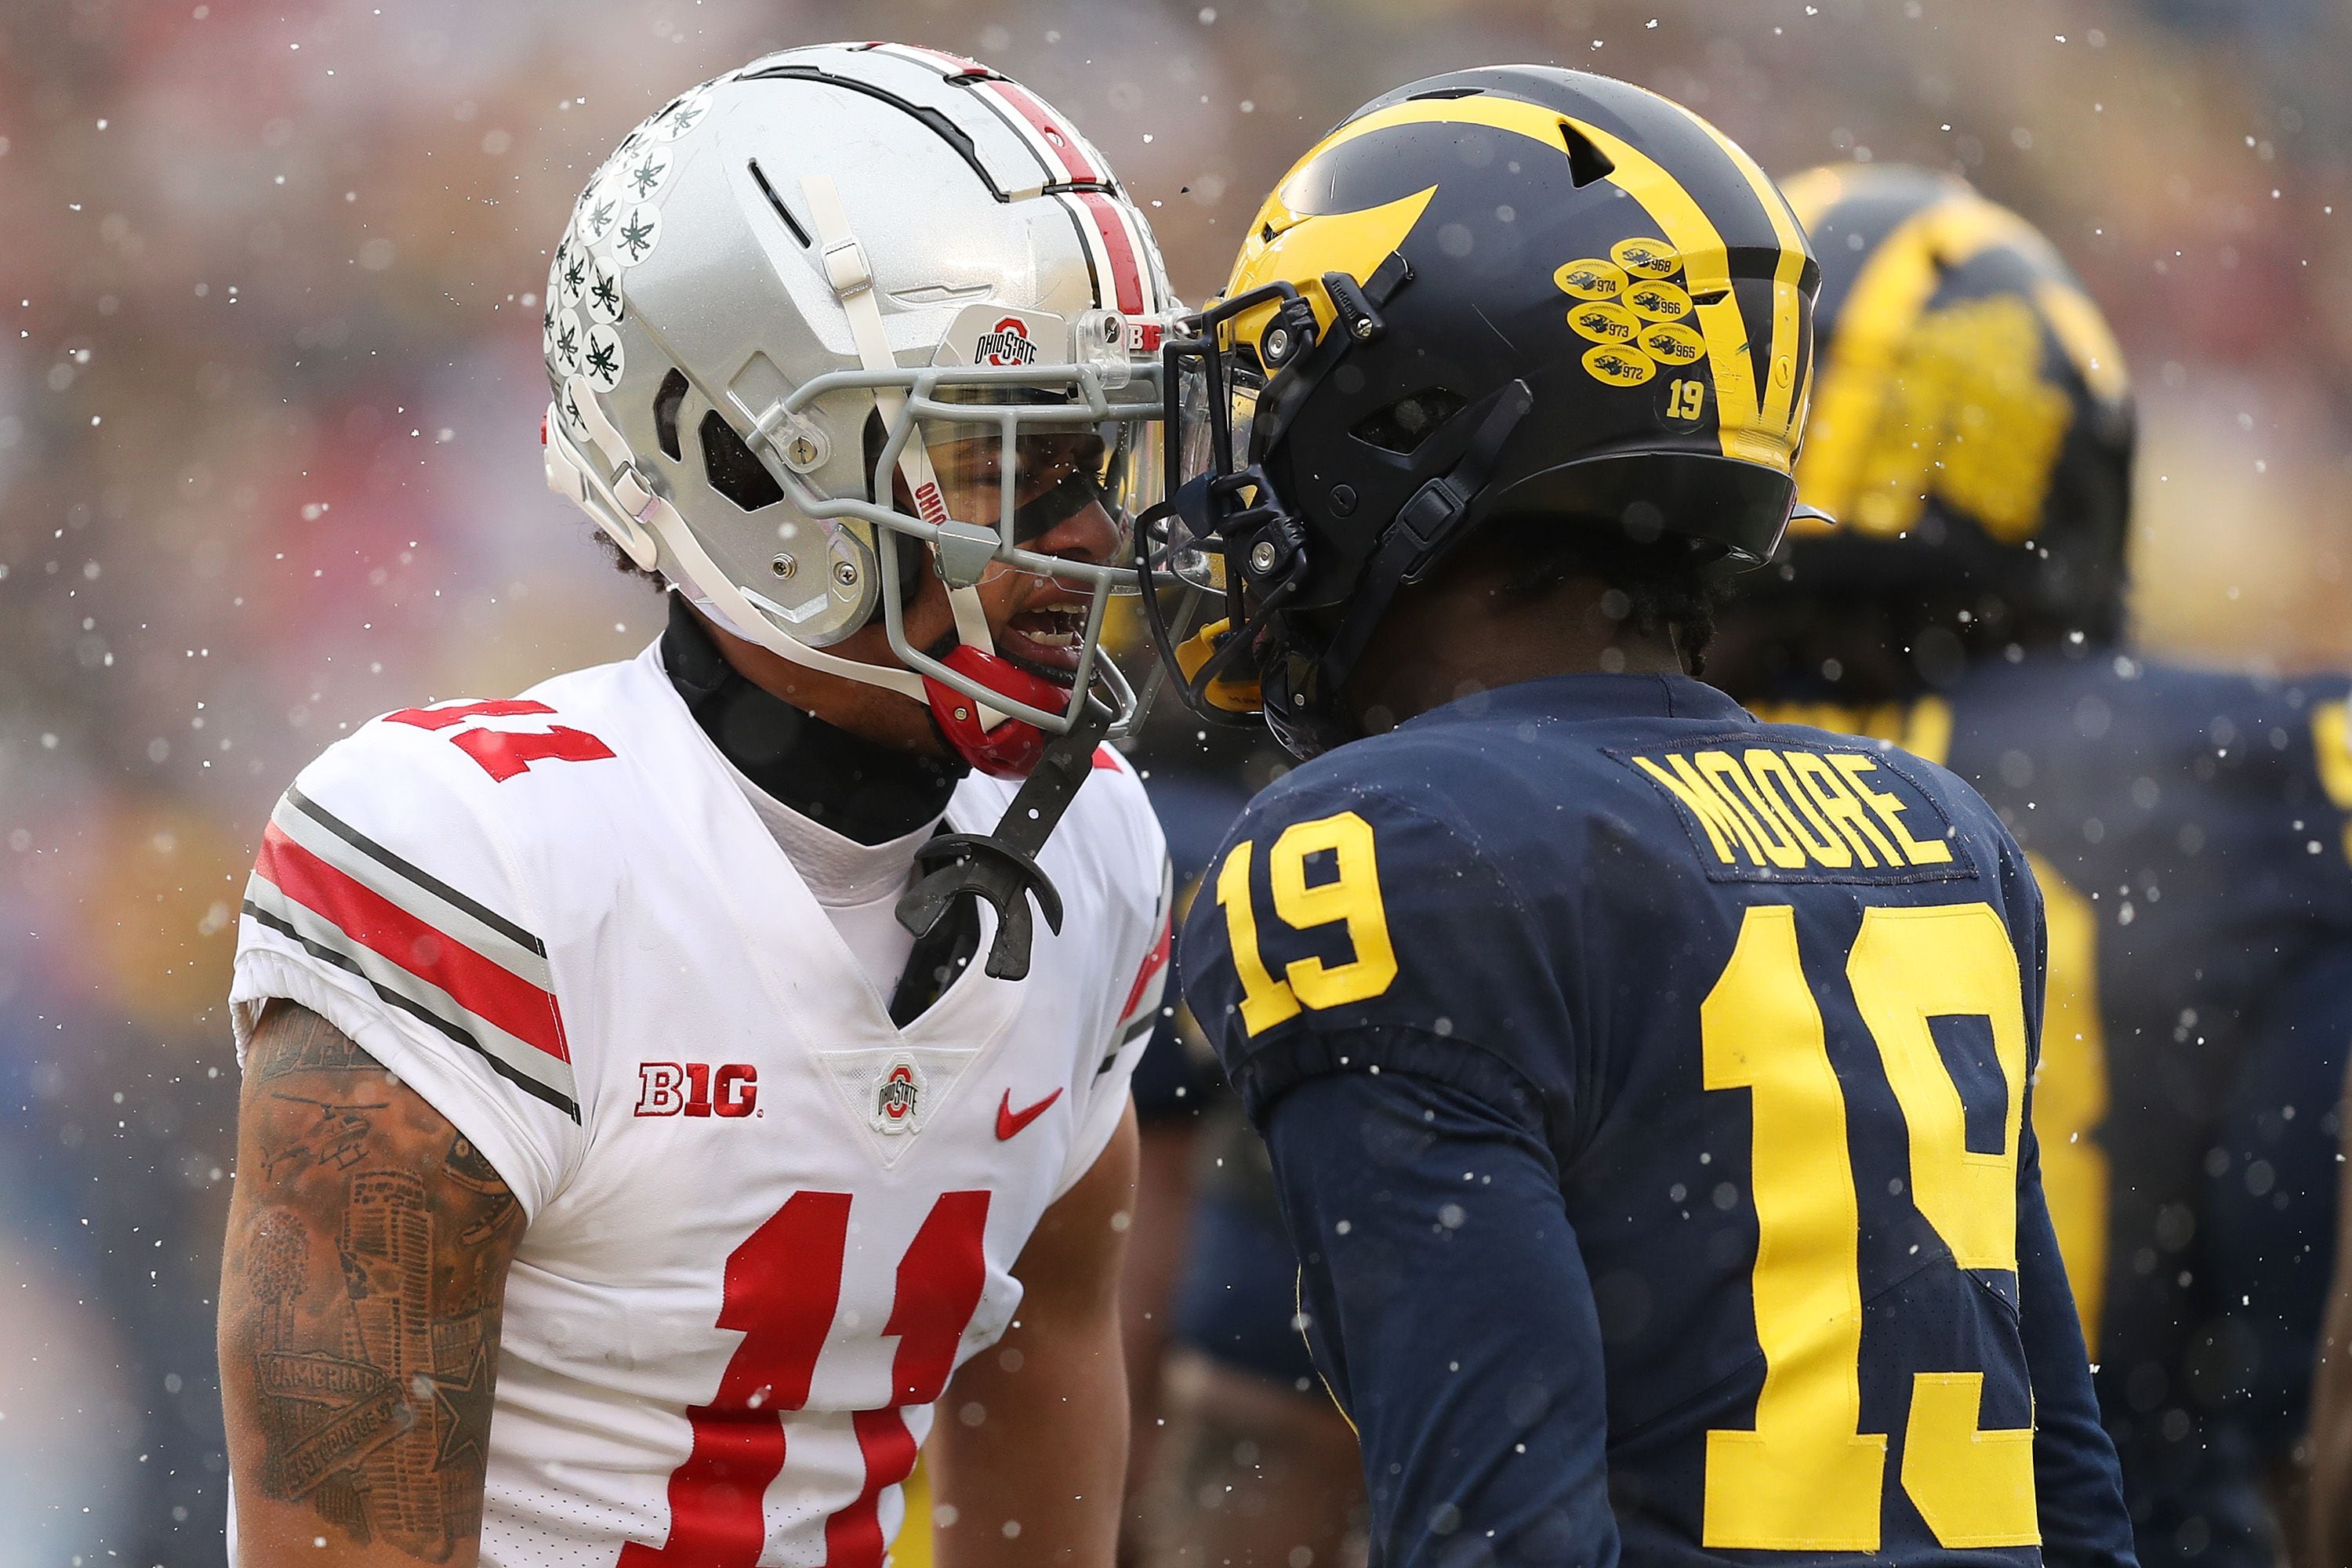 Michigan vs. Ohio State odds: Who is the better bet to win it all?